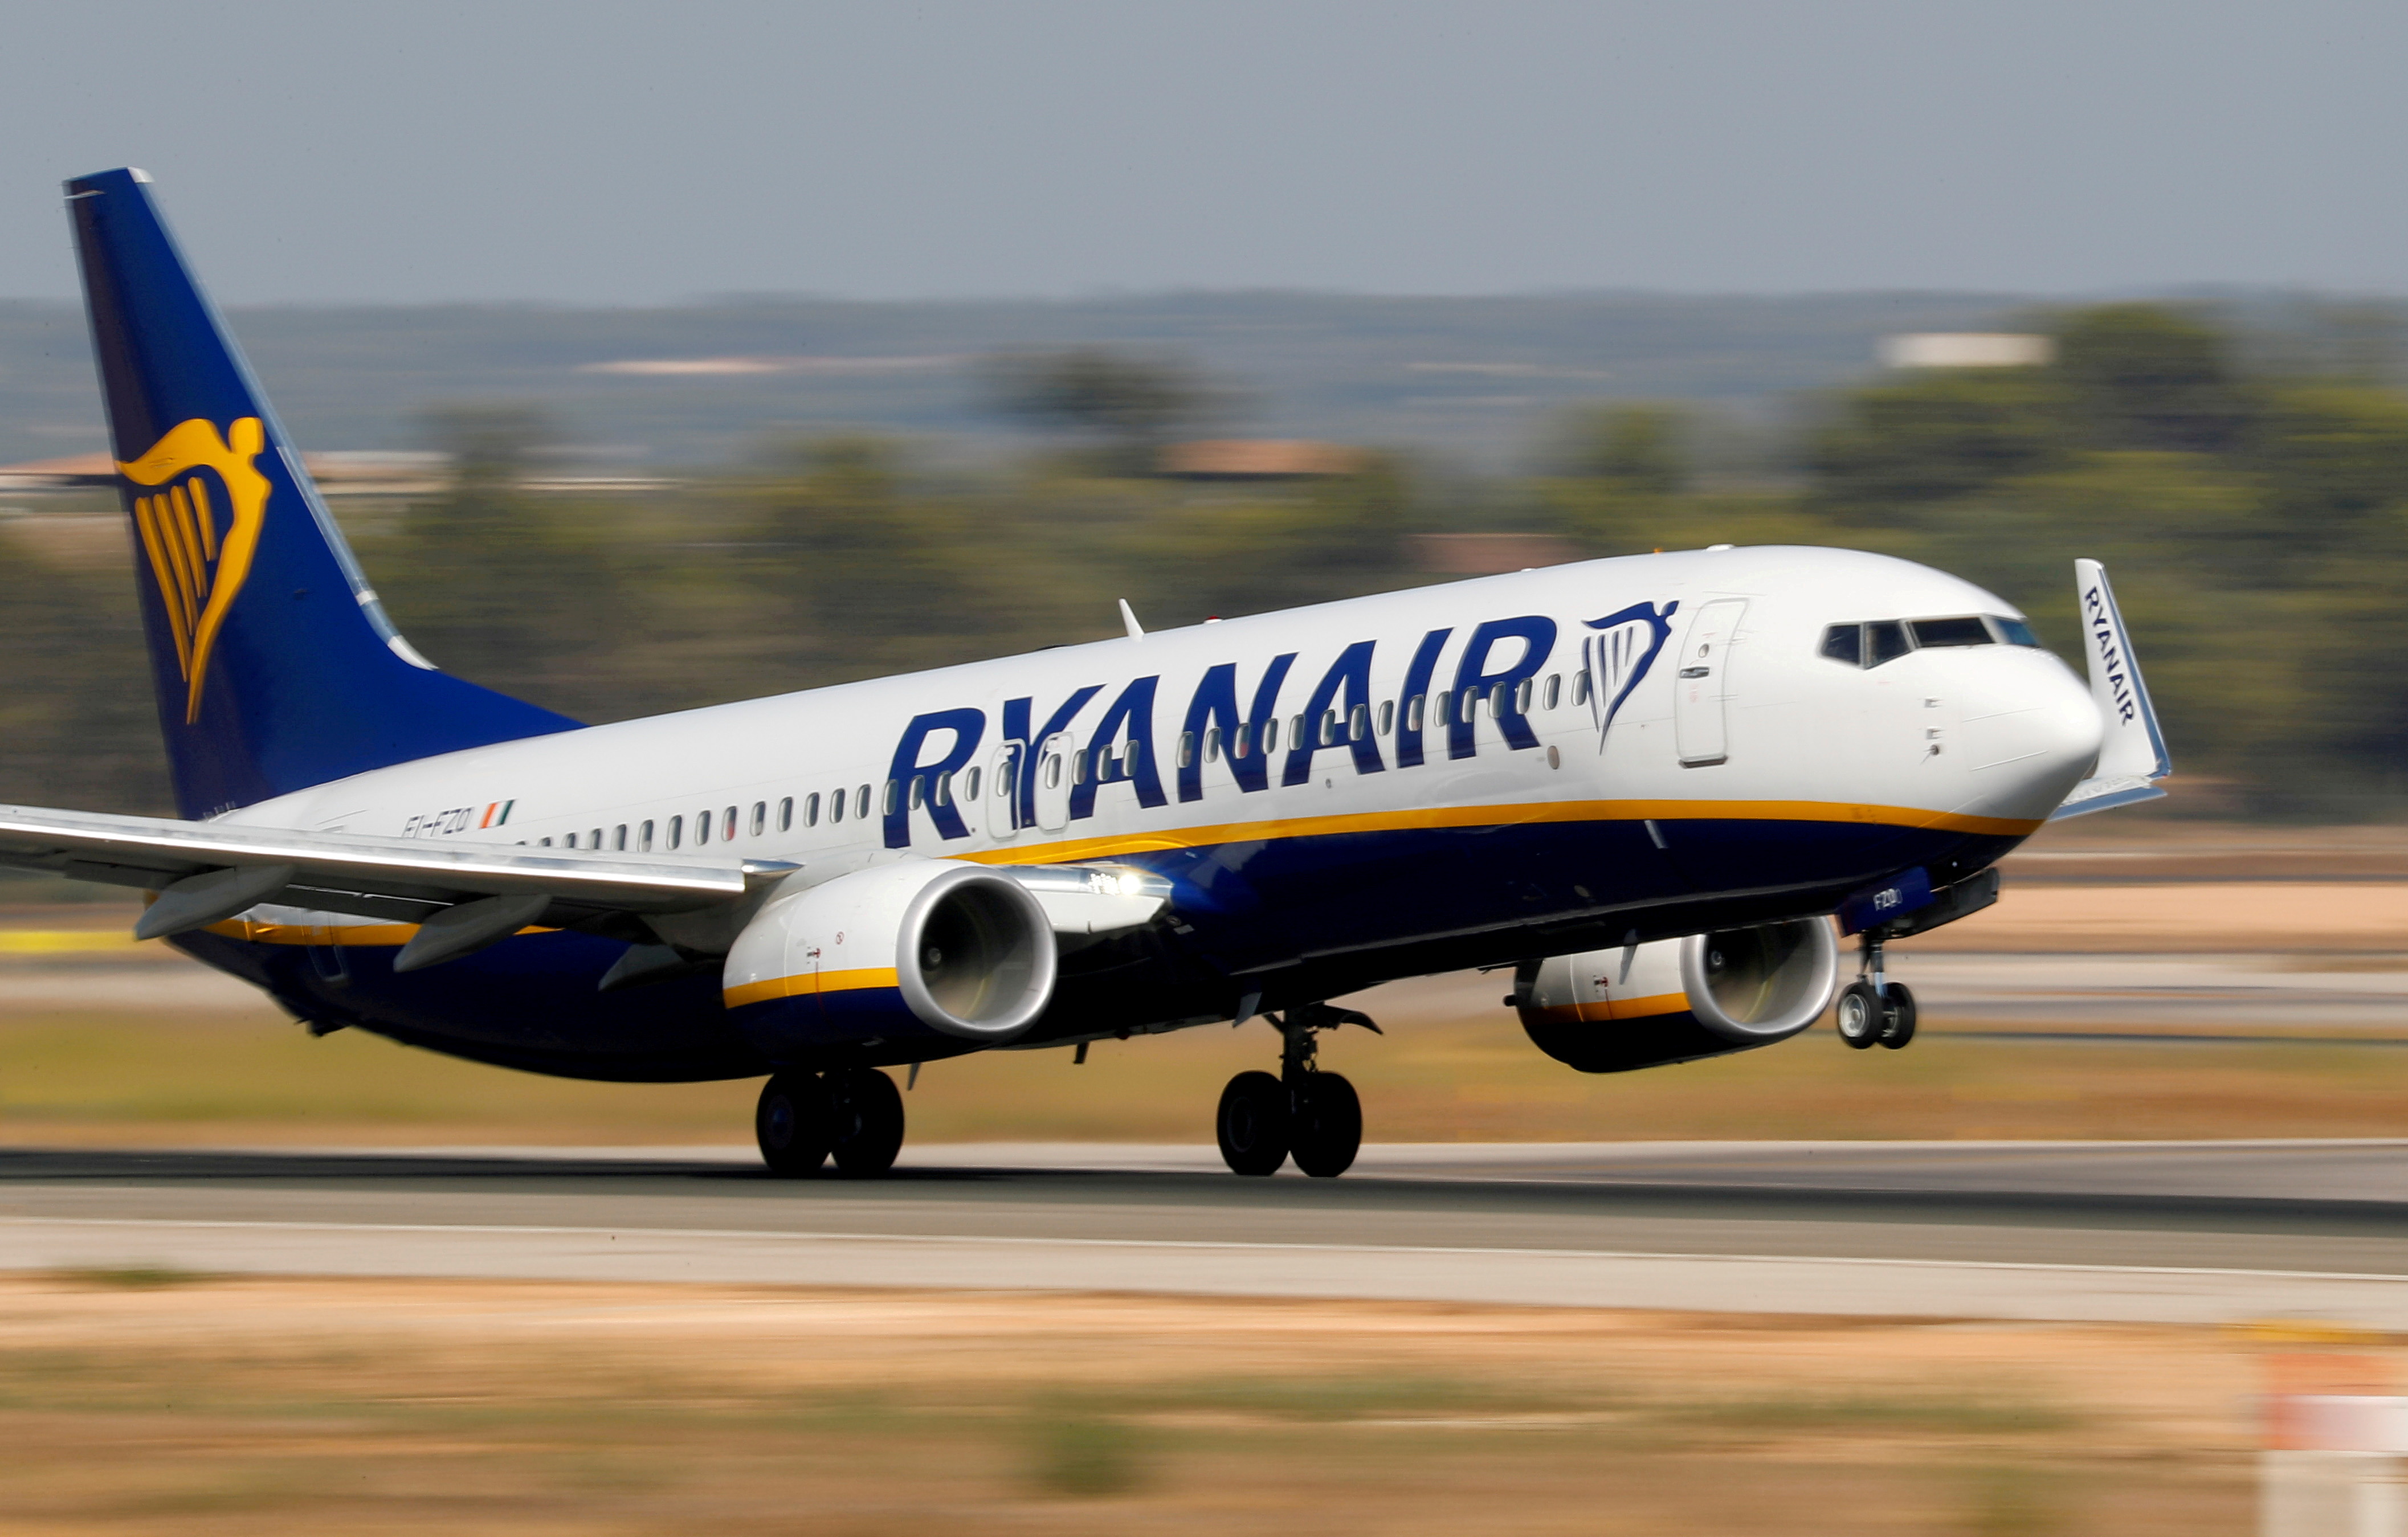 A Ryanair Boeing 737 airplane takes off from the airport in Palma de Mallorca